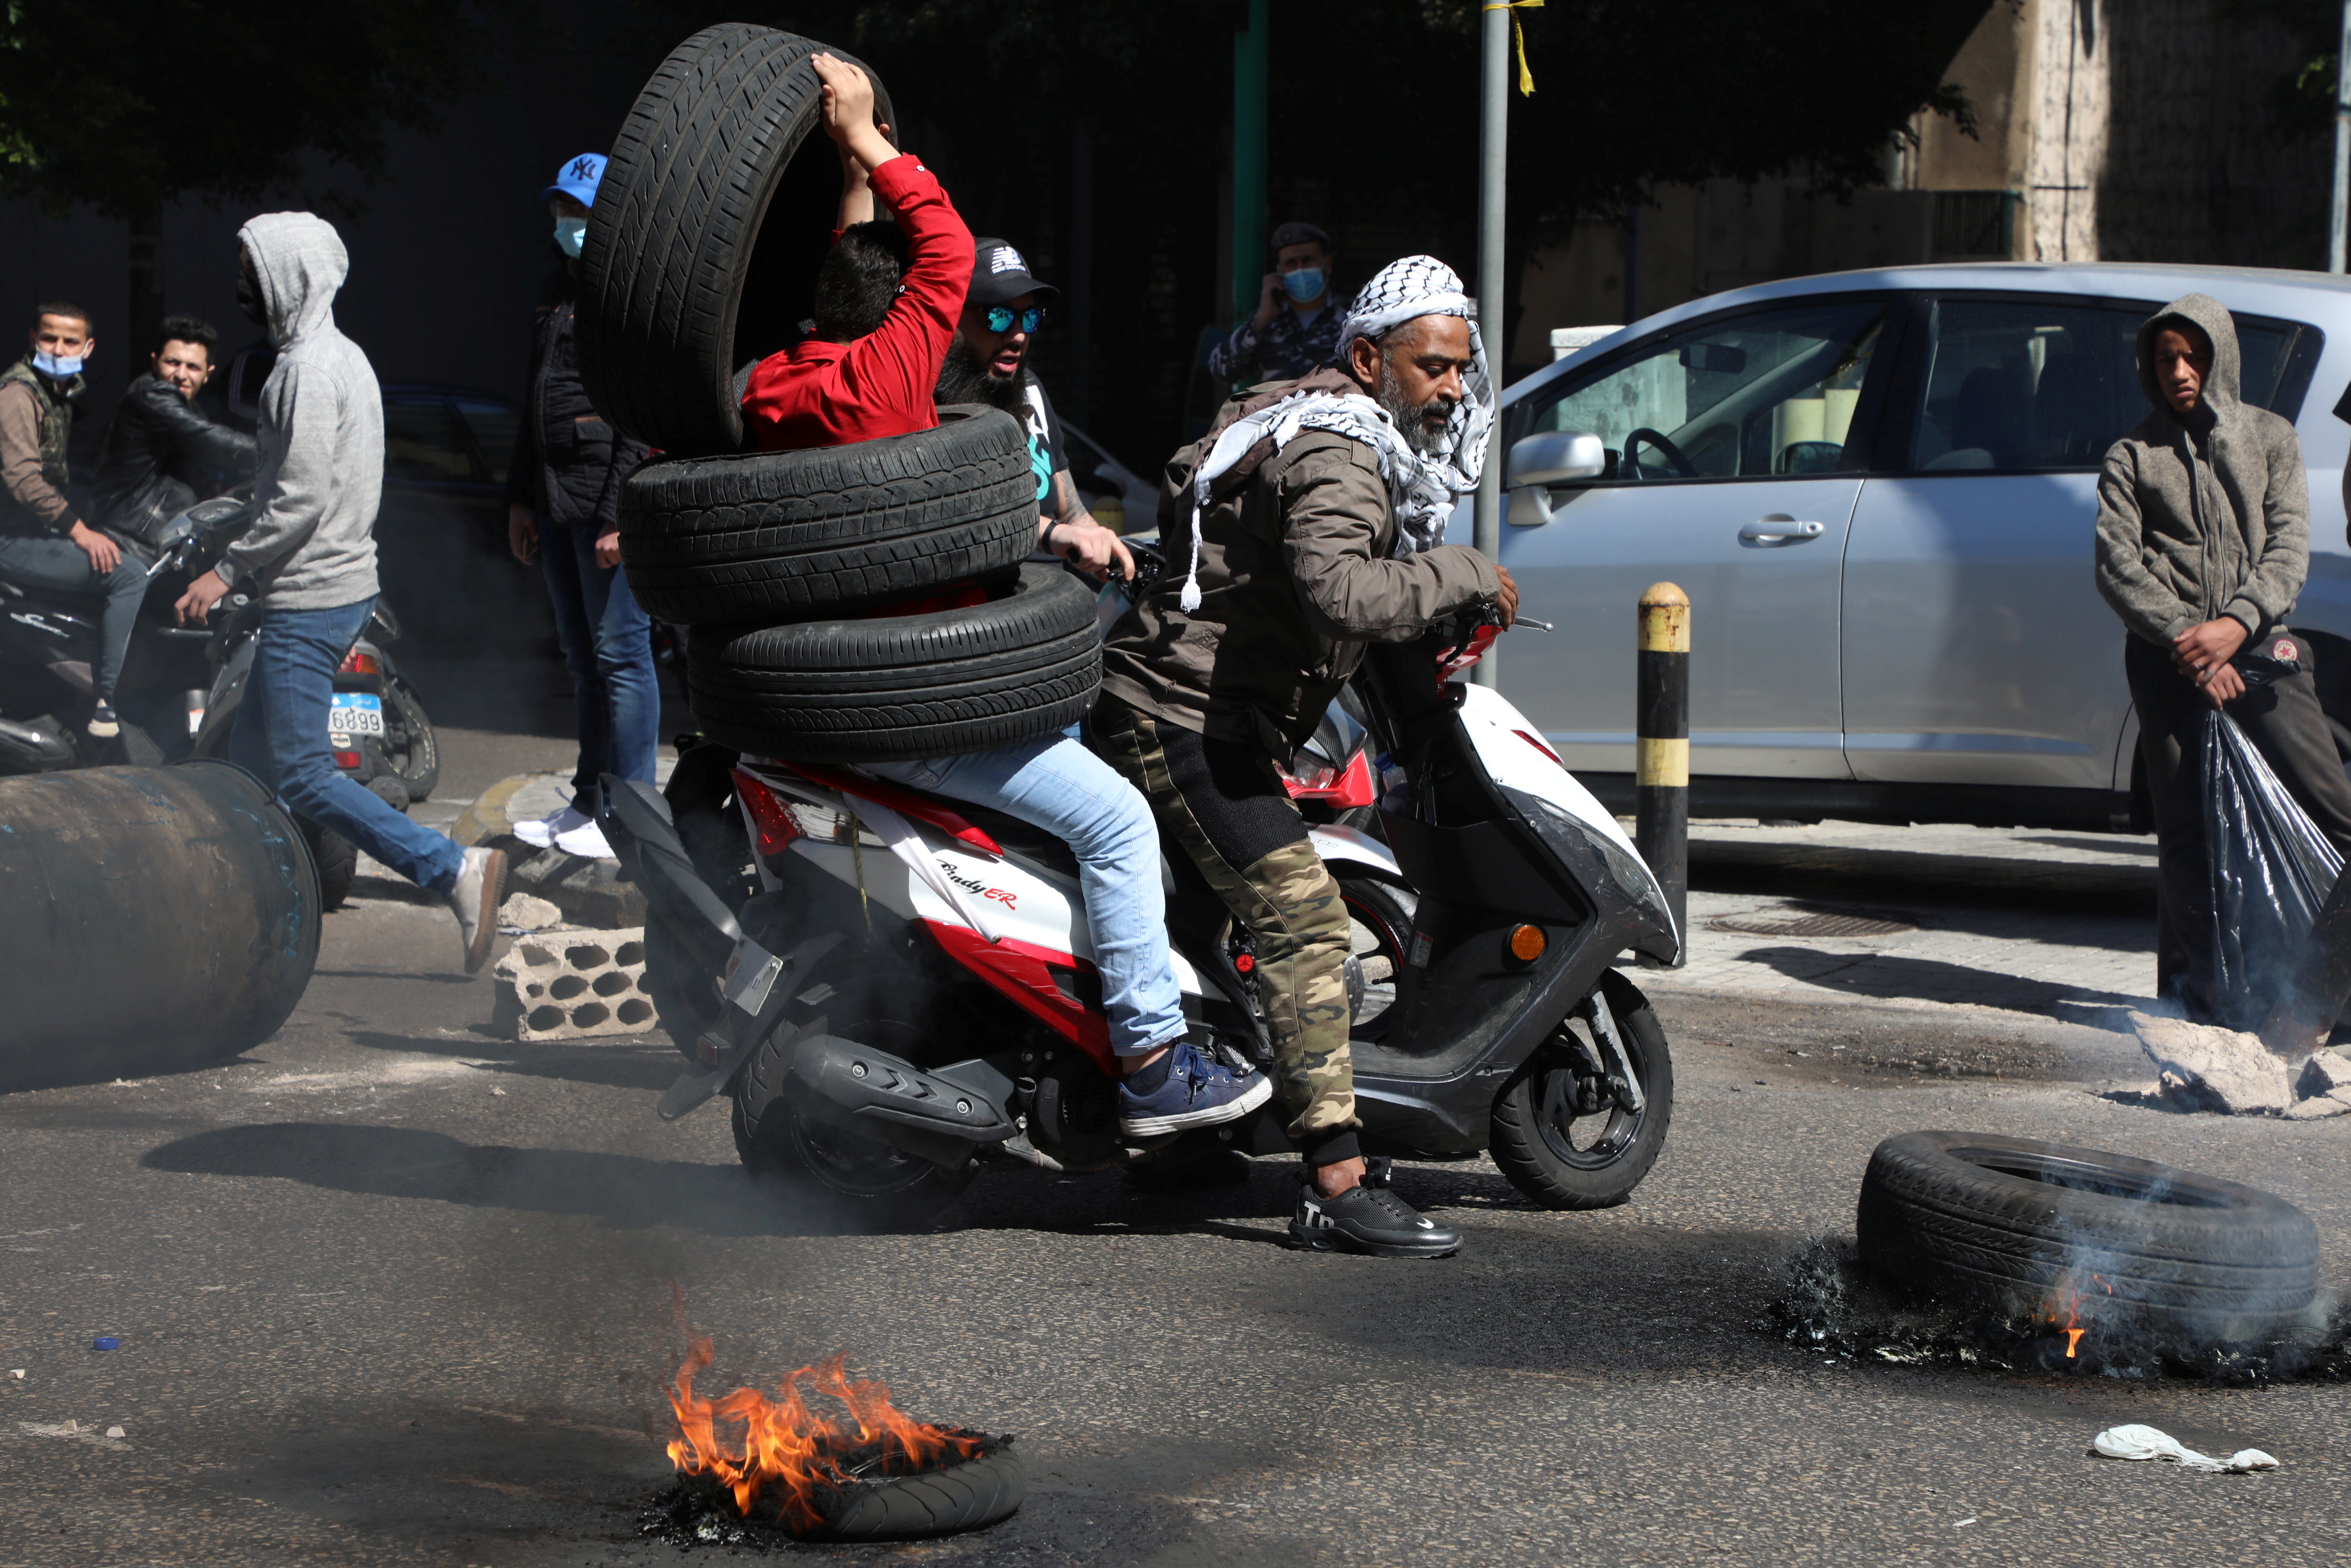 Demonstrators attempt to block a road with tires, during a protest against the fall in Lebanese pound currency and mounting economic hardships, in Beirut, Lebanon March 16, 2021. REUTERS/Mohamed Azakir